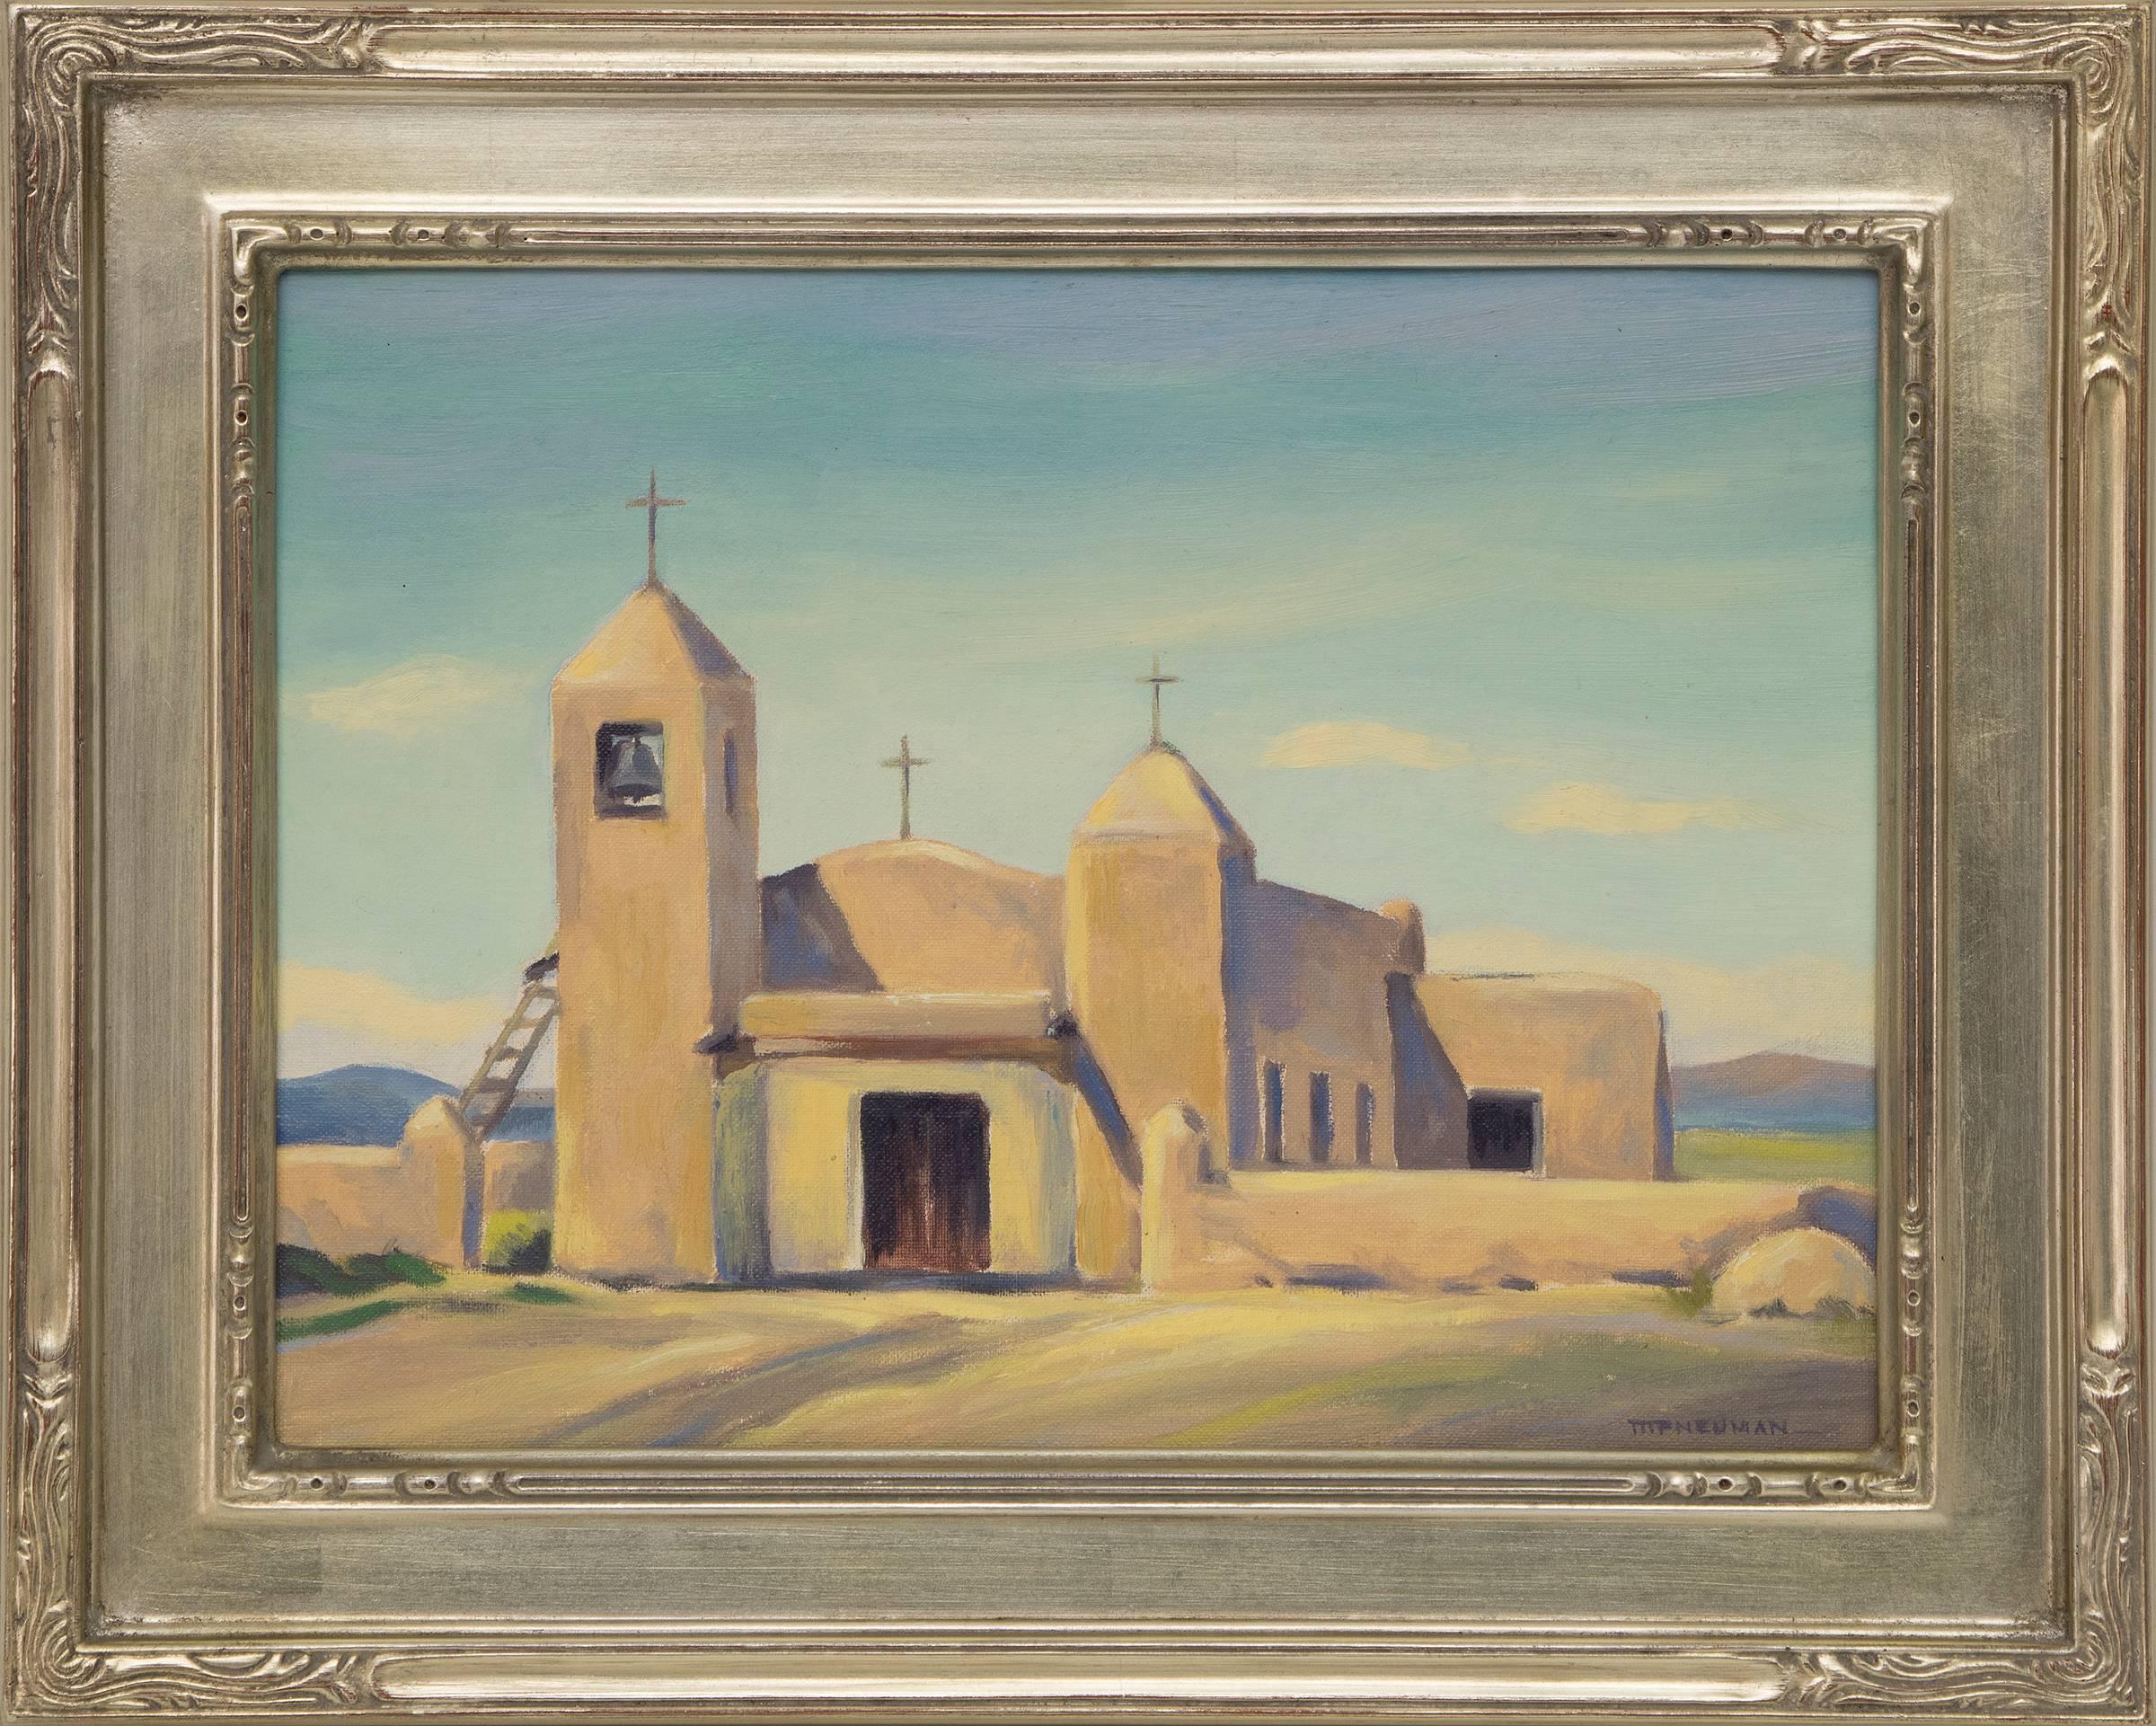 Mildred Pneuman Landscape Painting – Small Church, Taos (New Mexico)